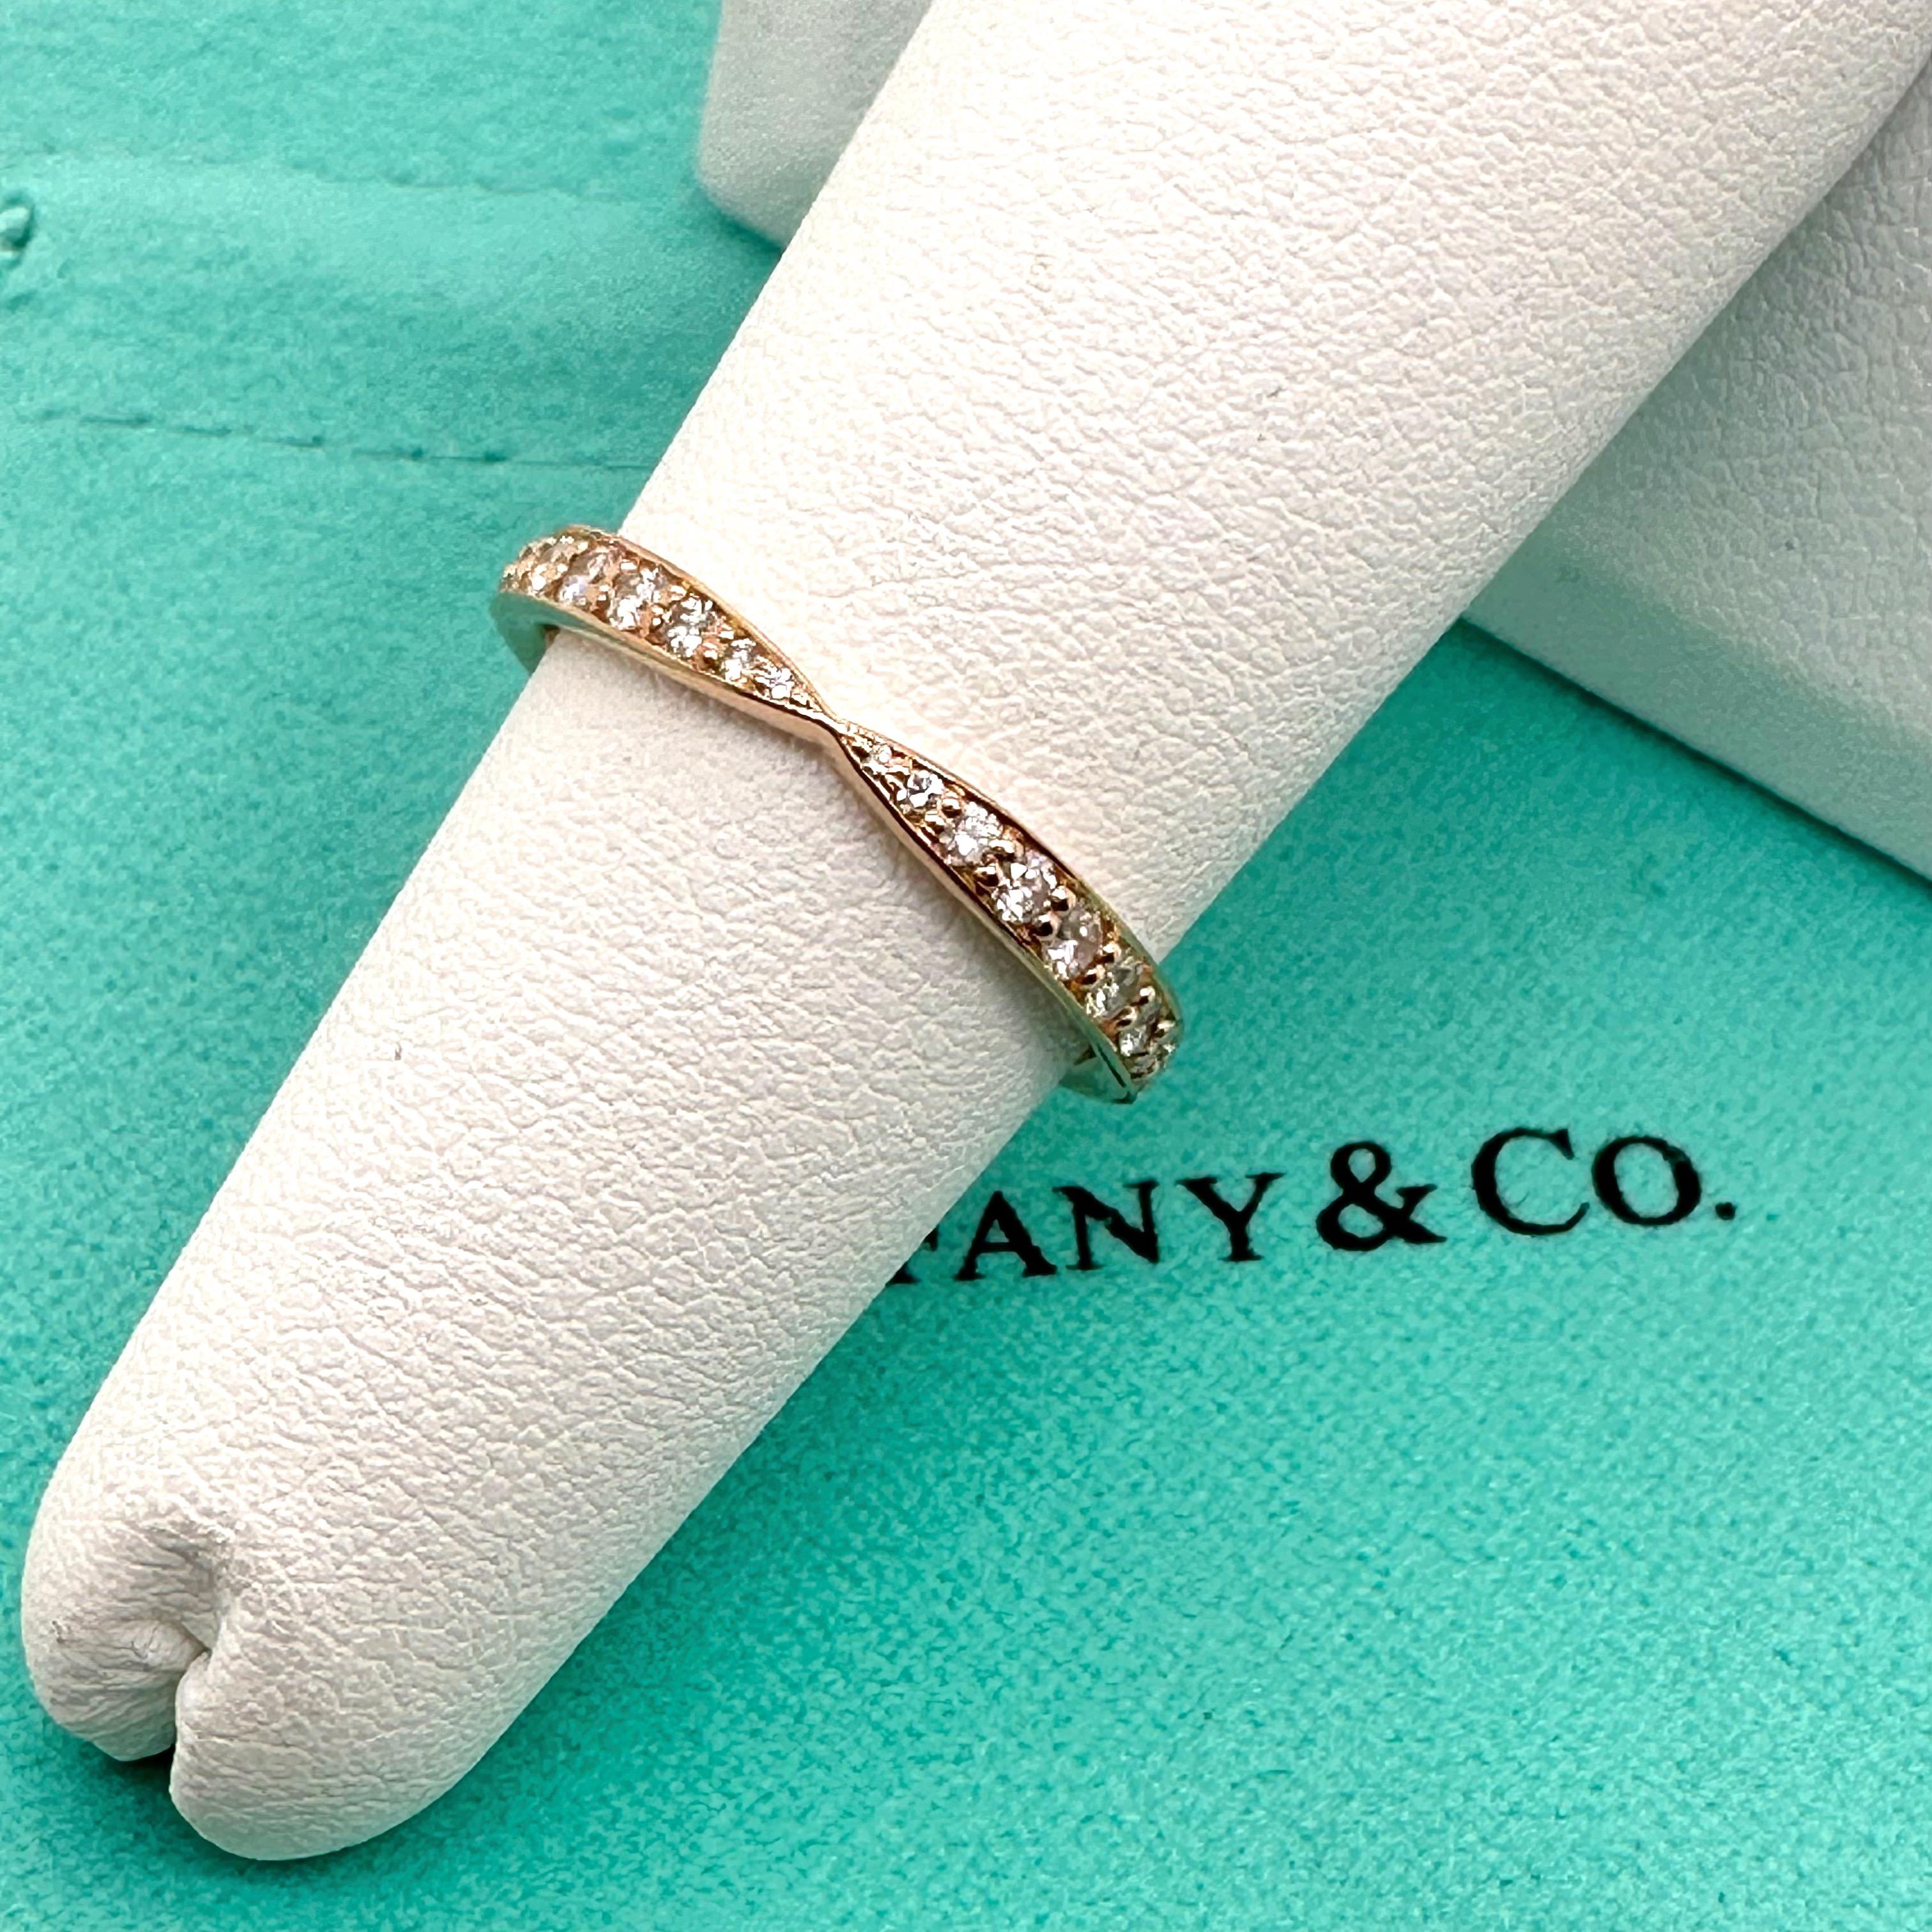 Tiffany & Co. Harmony Diamond Rose Gold Band Ring In Excellent Condition For Sale In San Diego, CA